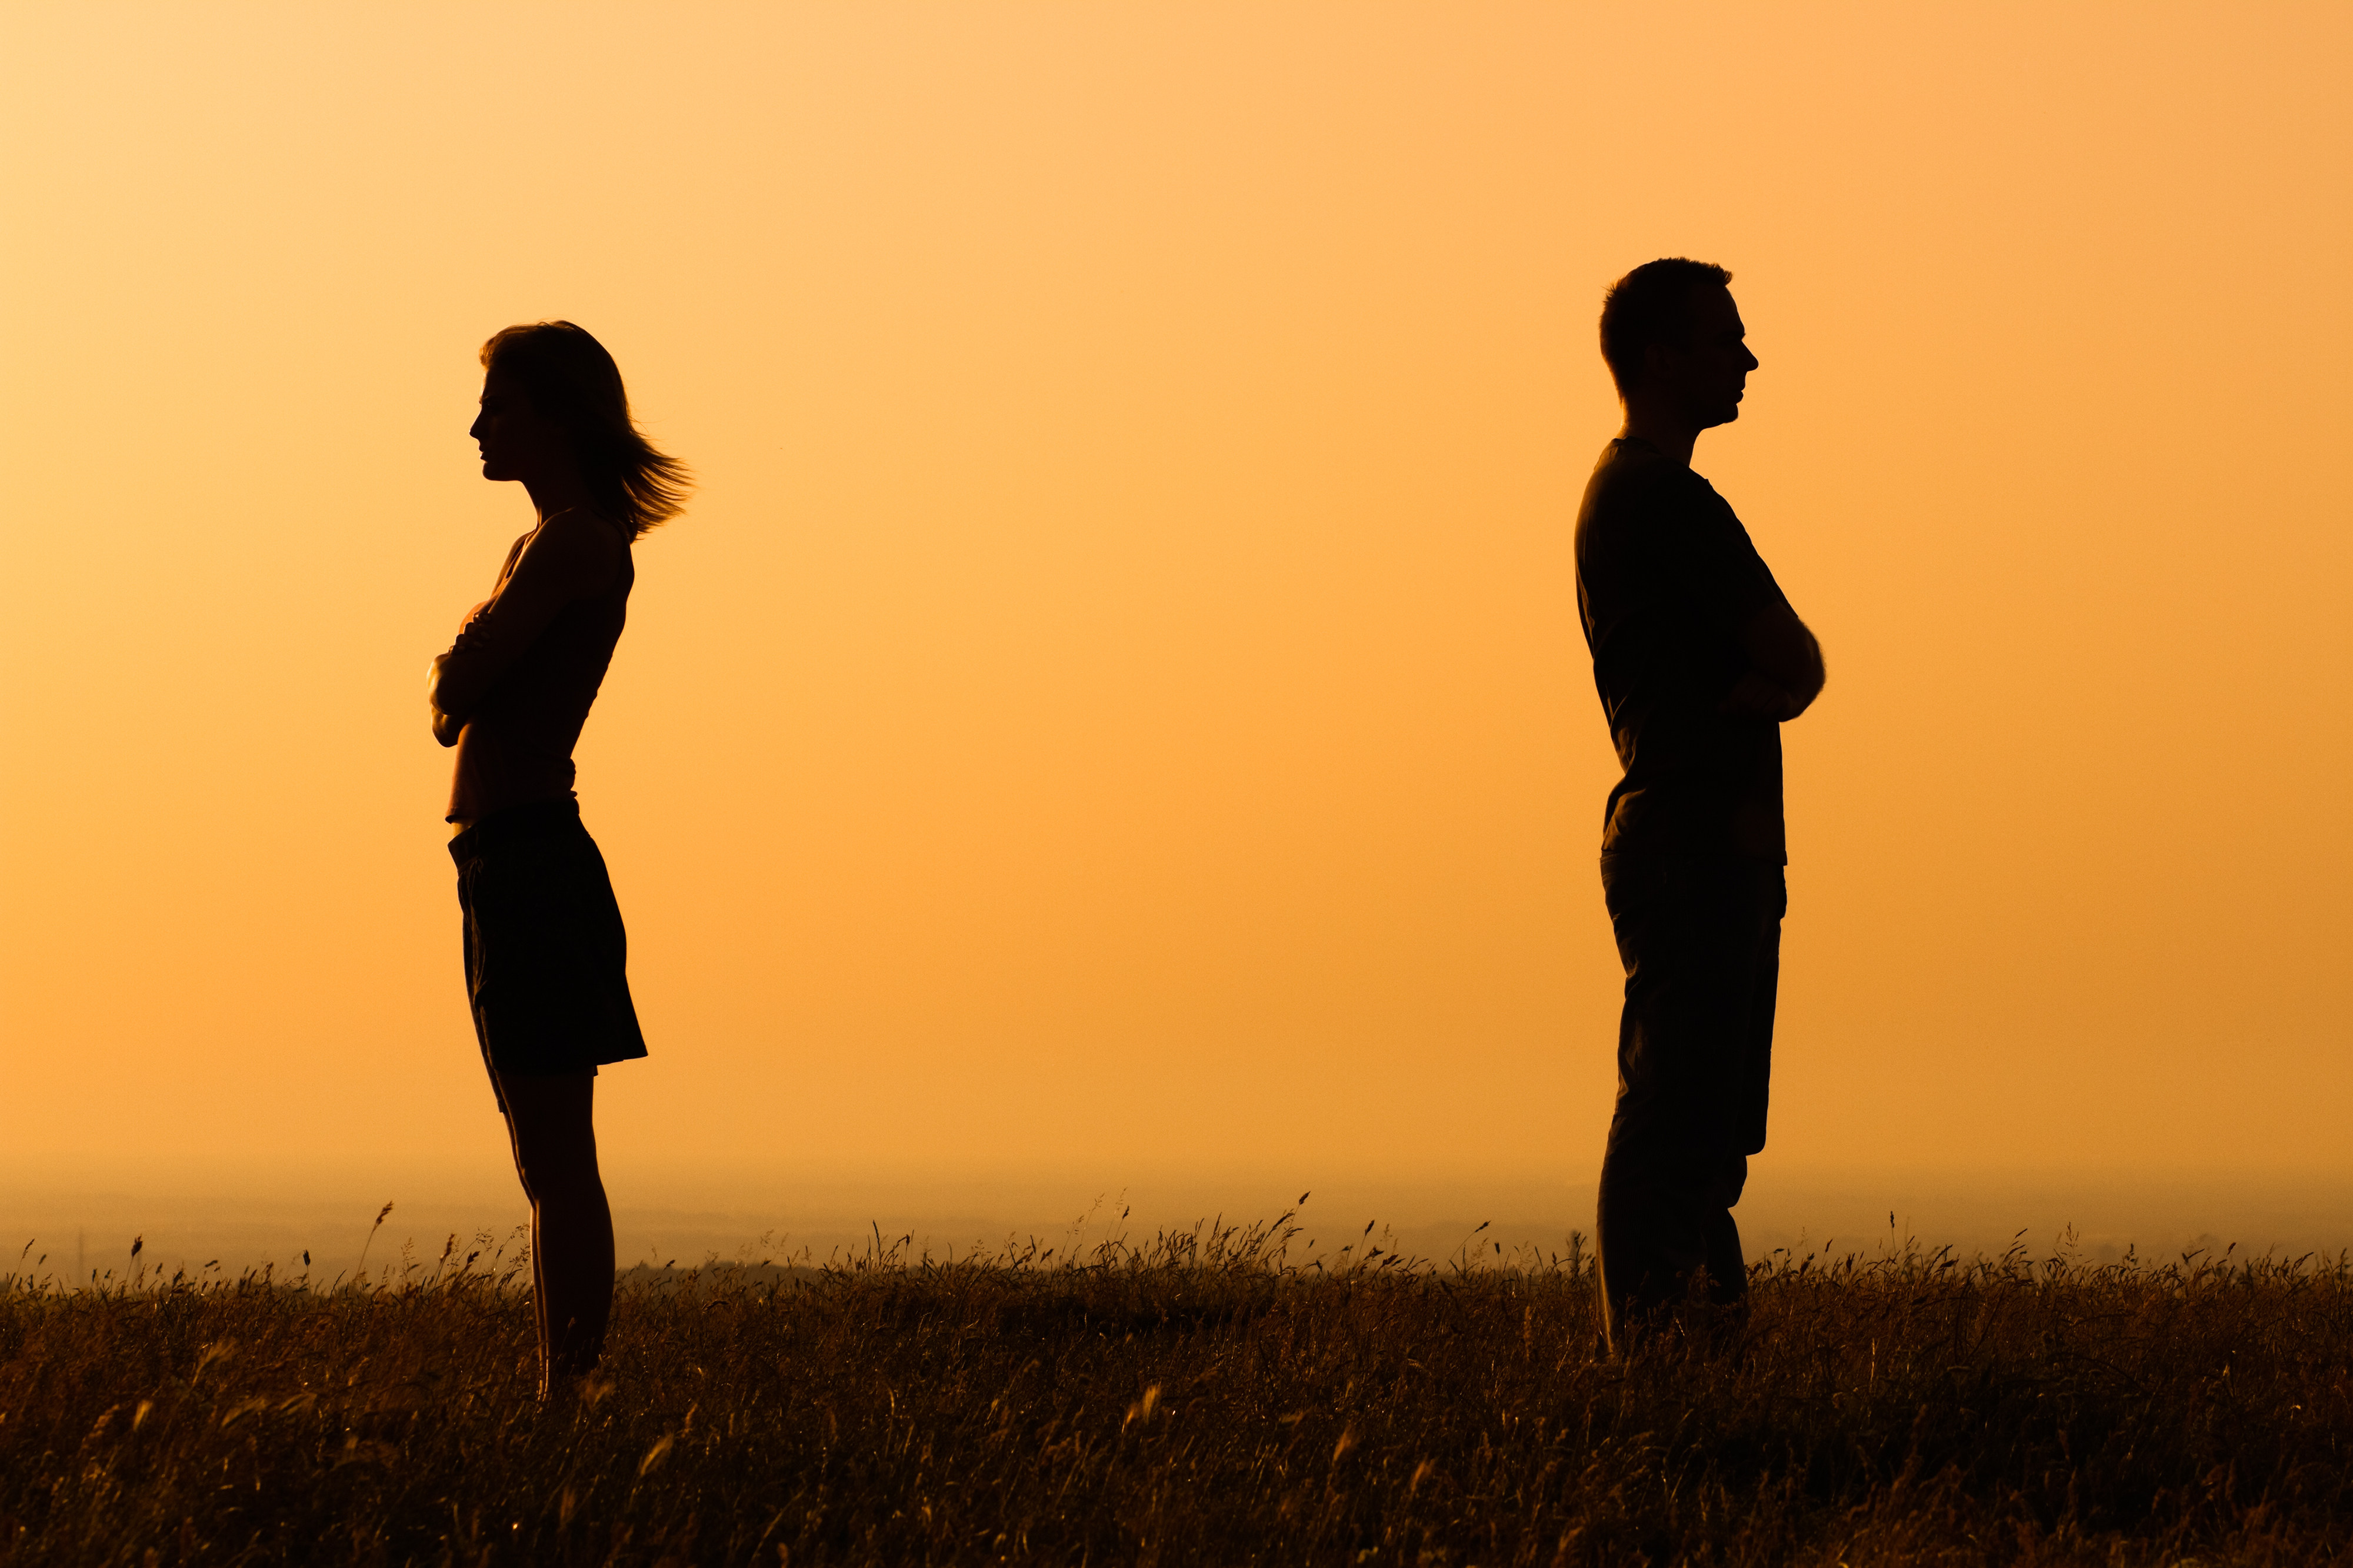 An increasing number of couples aged in their late thirties to late forties filed for divorce in the past five years, a lawyer said. Photo: Shutterstock